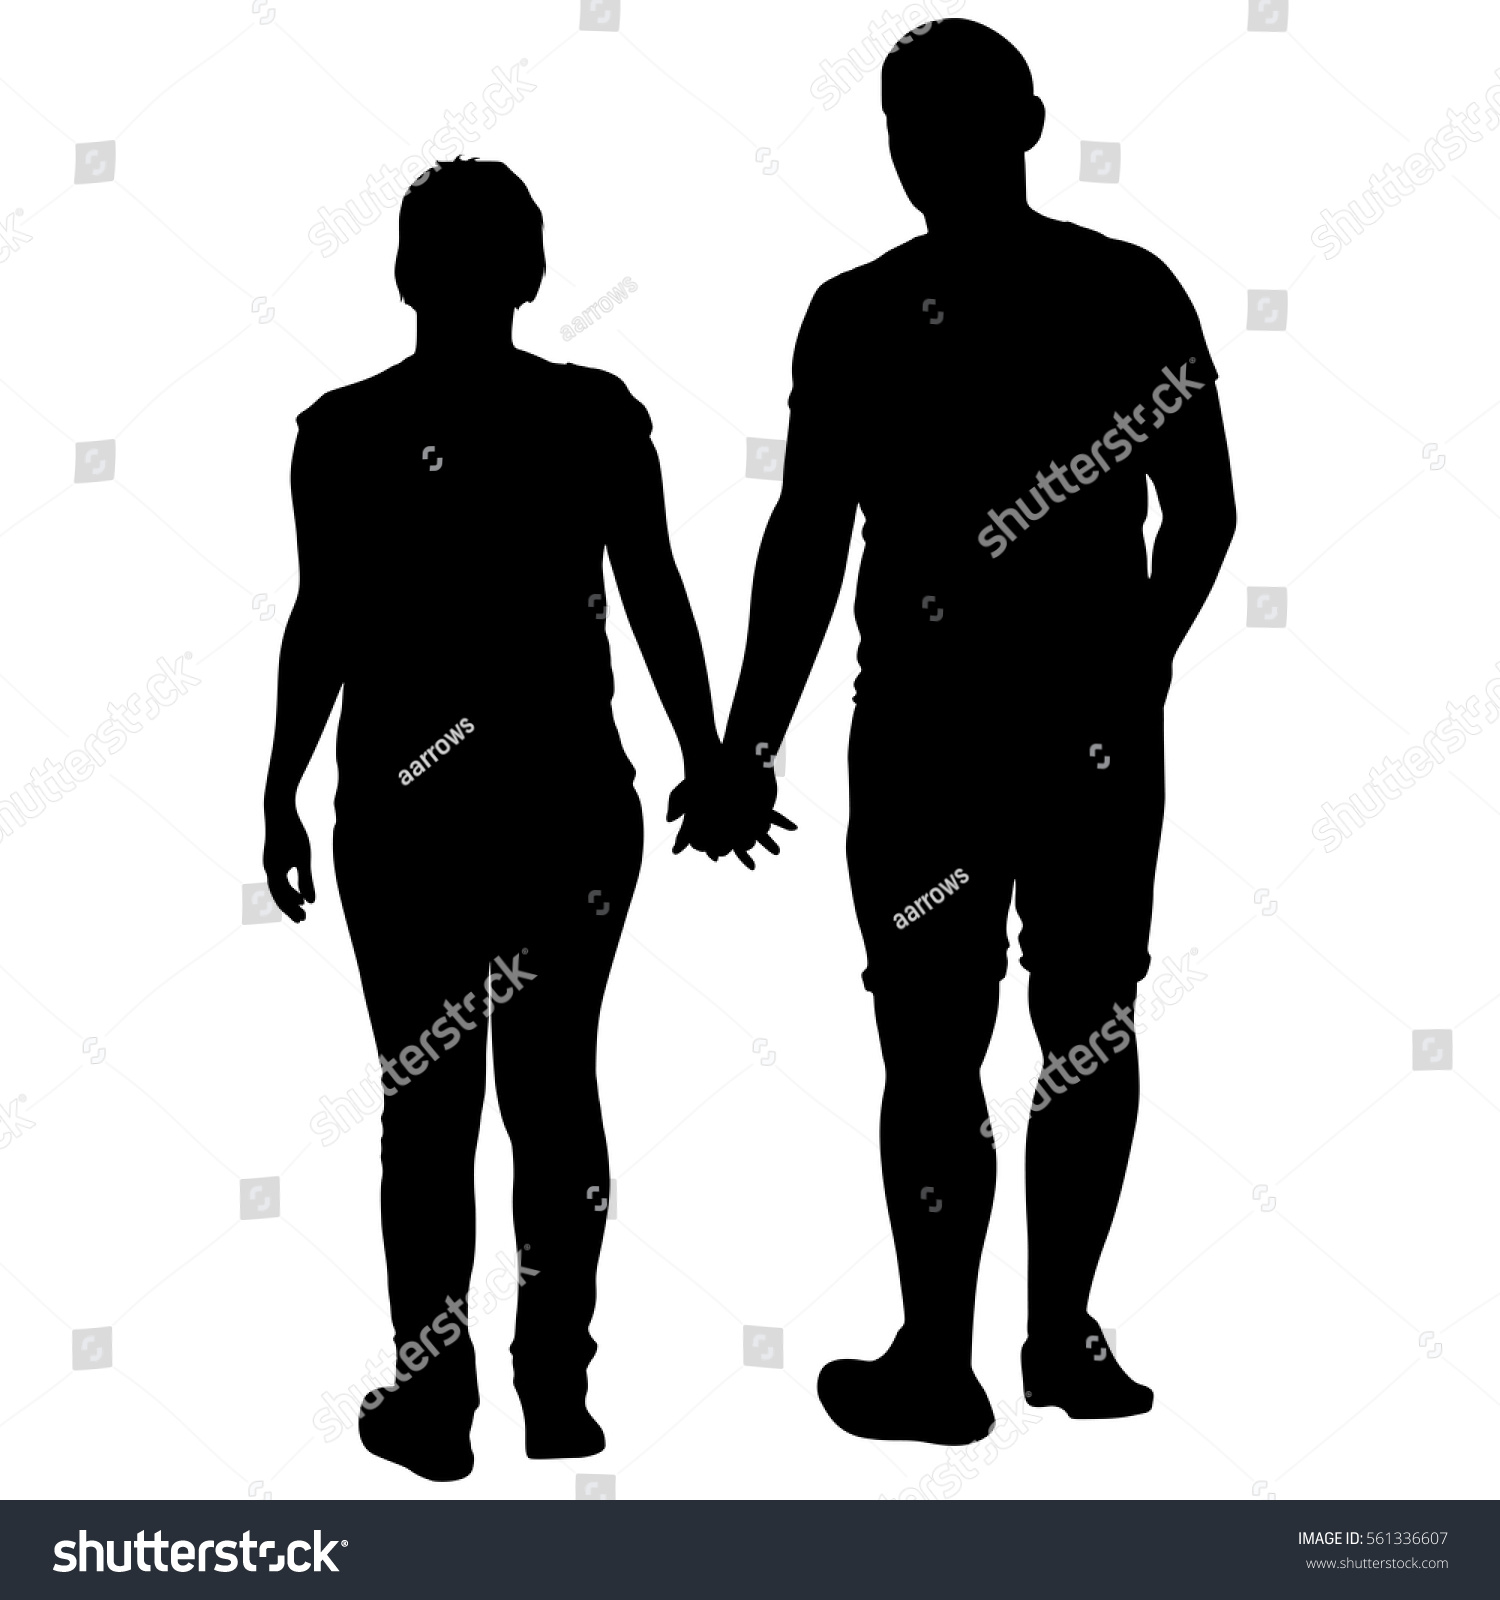 Couples Man Woman Silhouettes On White Stock Vector Royalty Free 561336607 Shutterstock